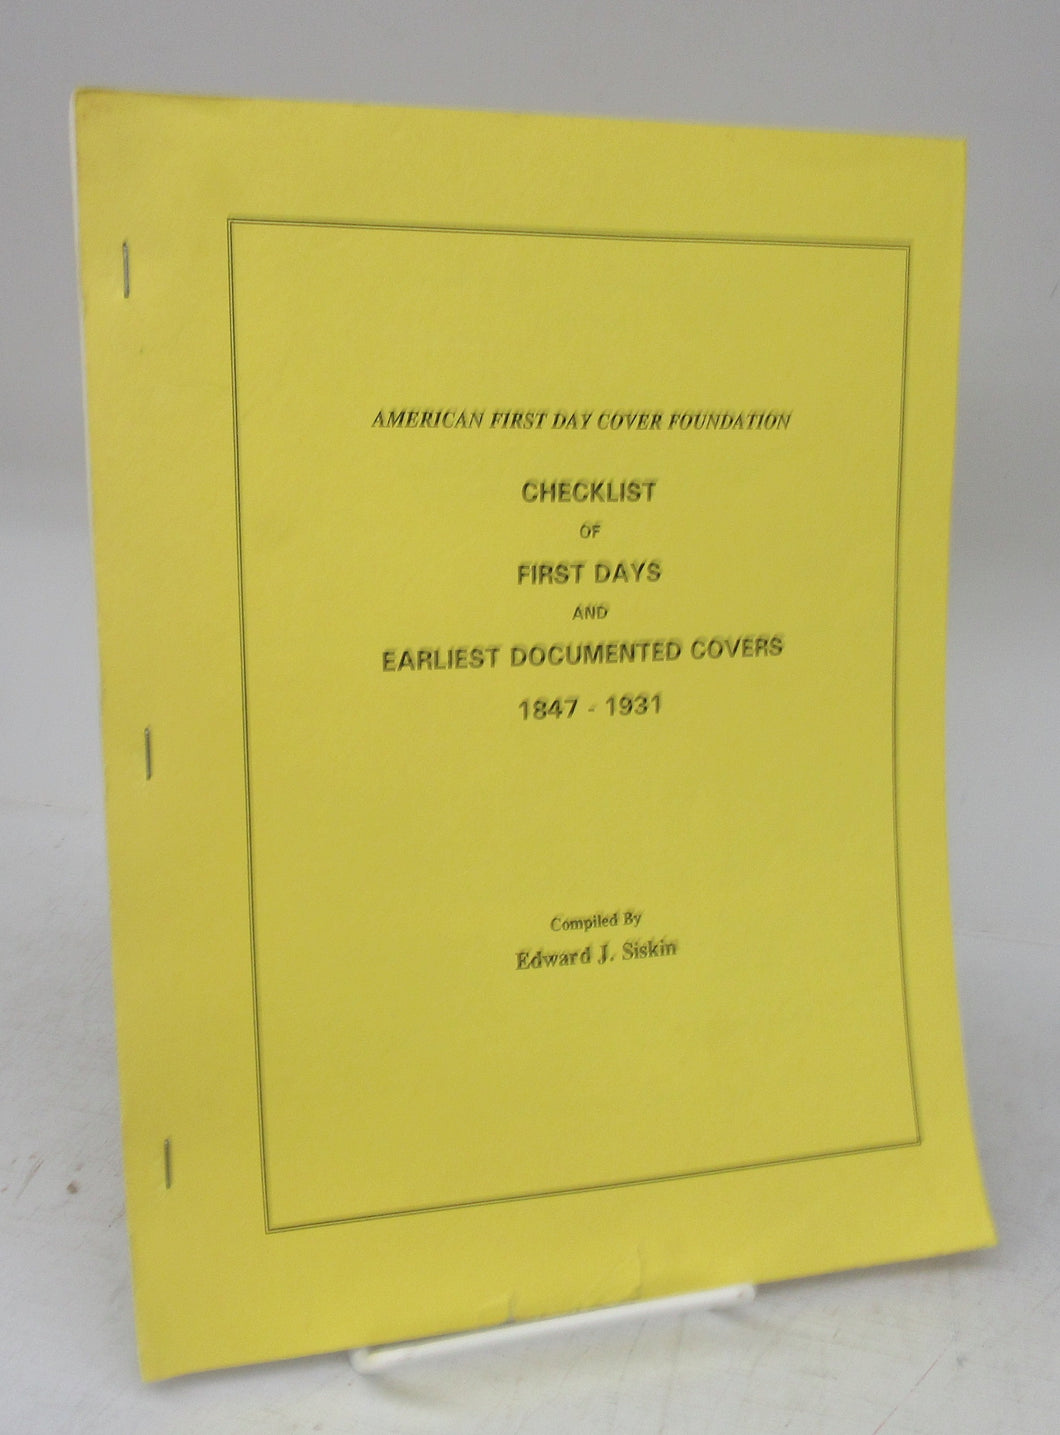 Checklist of First Days and Earliest Documented Covers 1847-1931